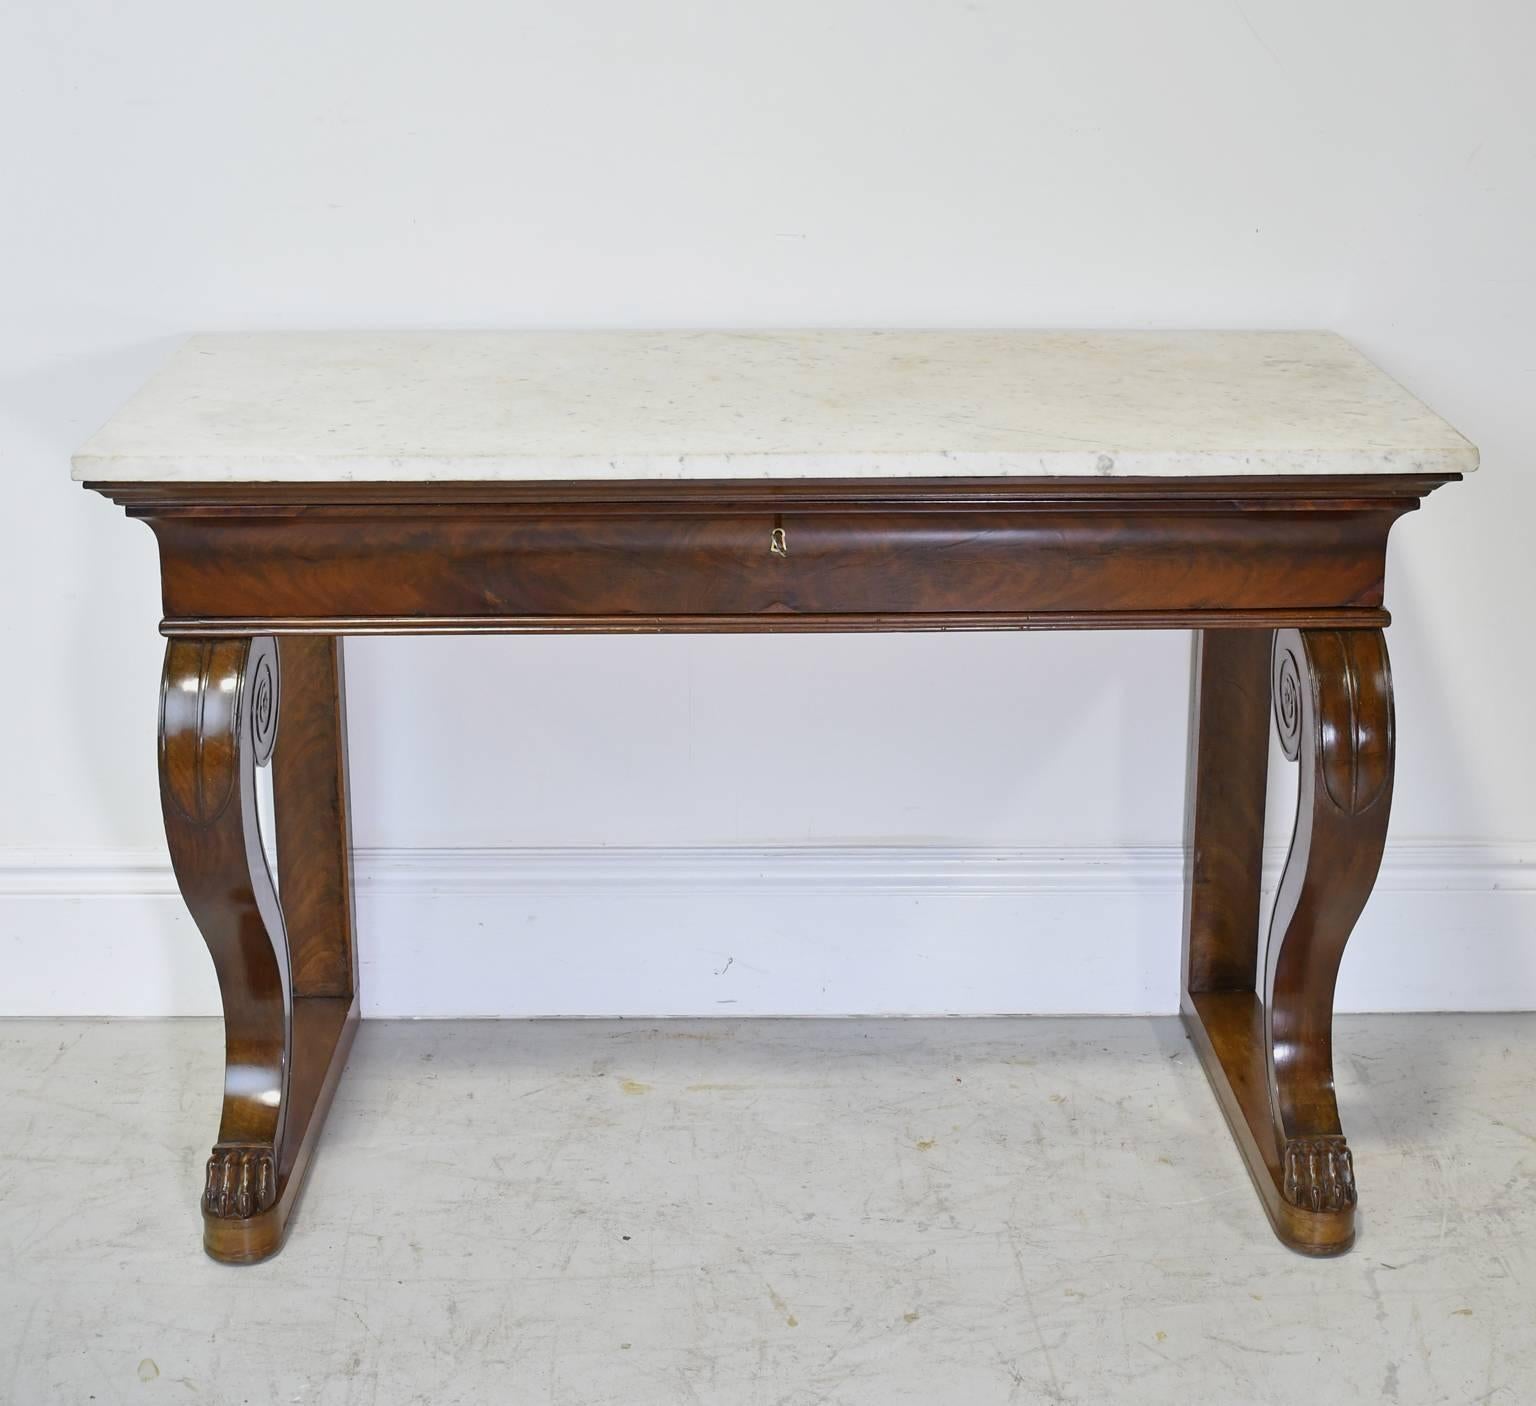 Hand-Carved French Empire Console Table in Mahogany w/ White Carrara Marble Top, circa 1800